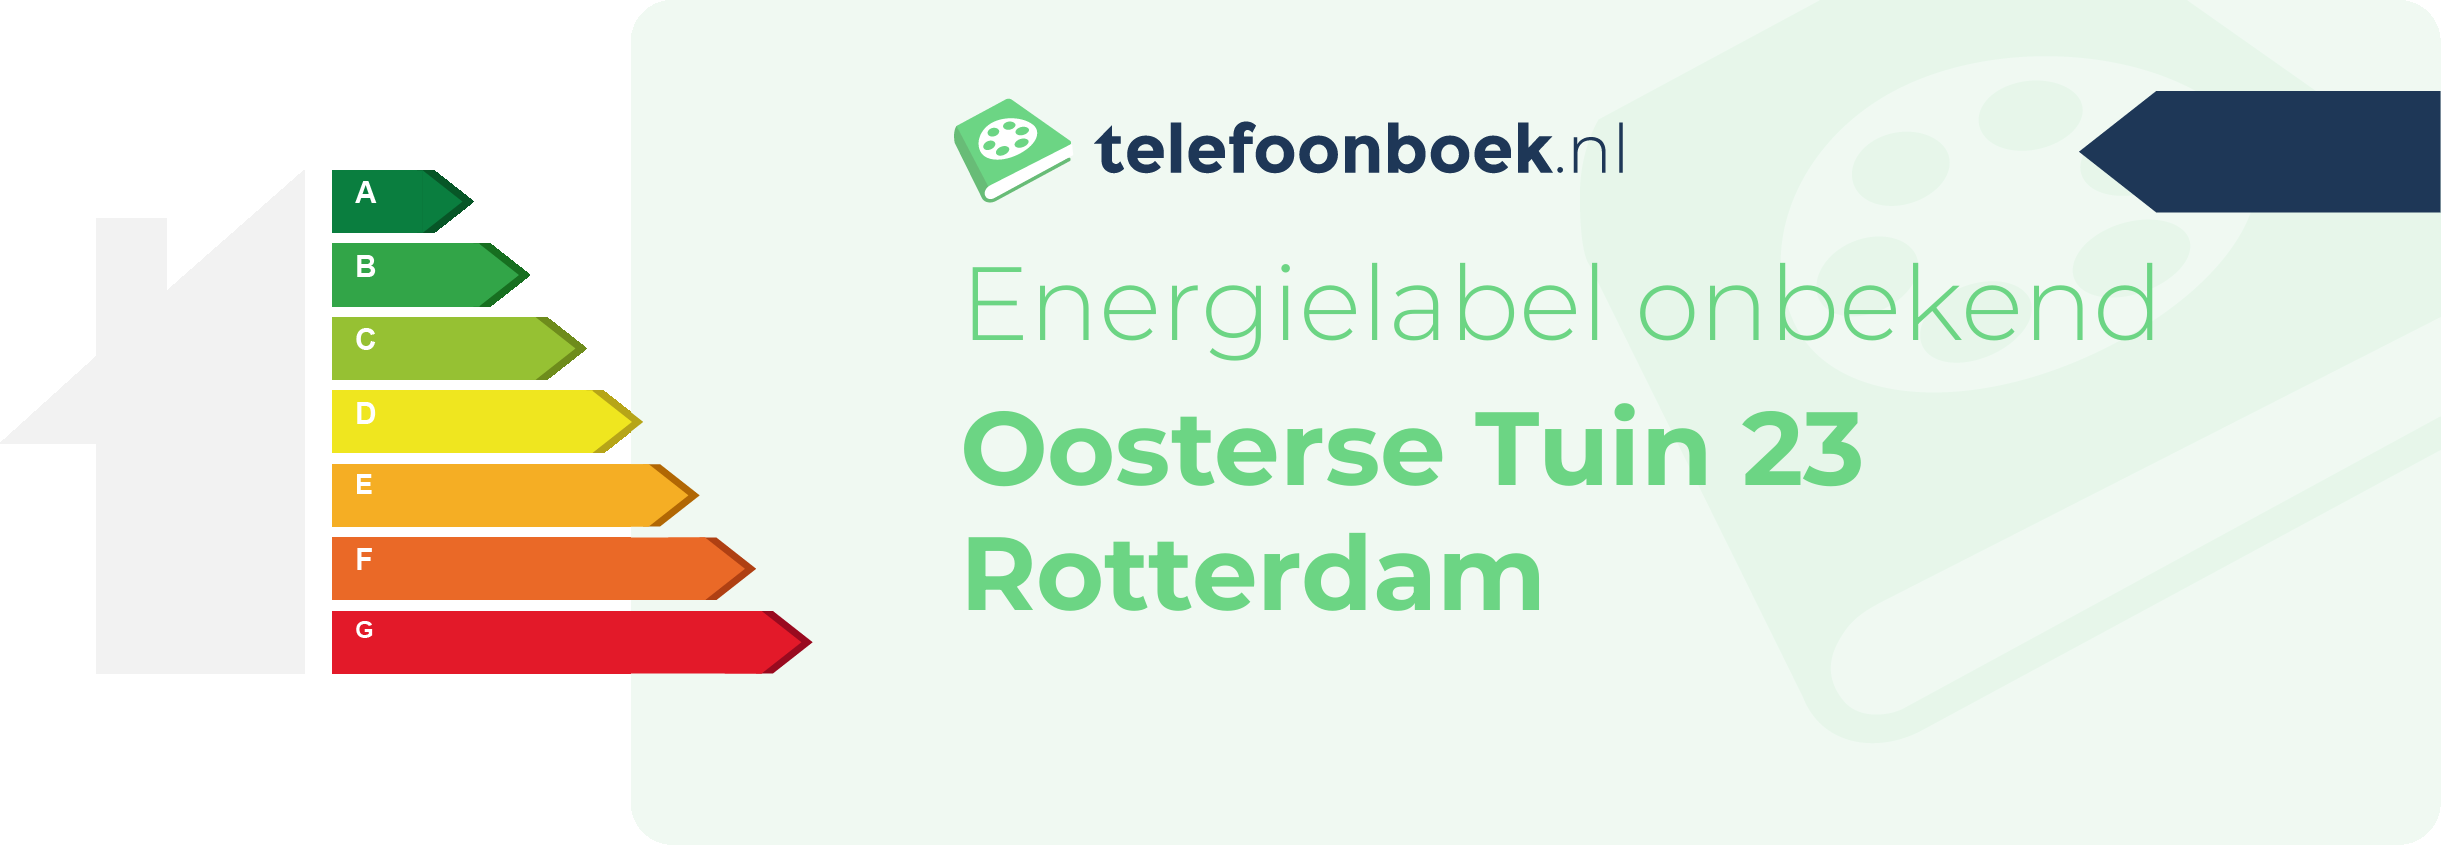 Energielabel Oosterse Tuin 23 Rotterdam